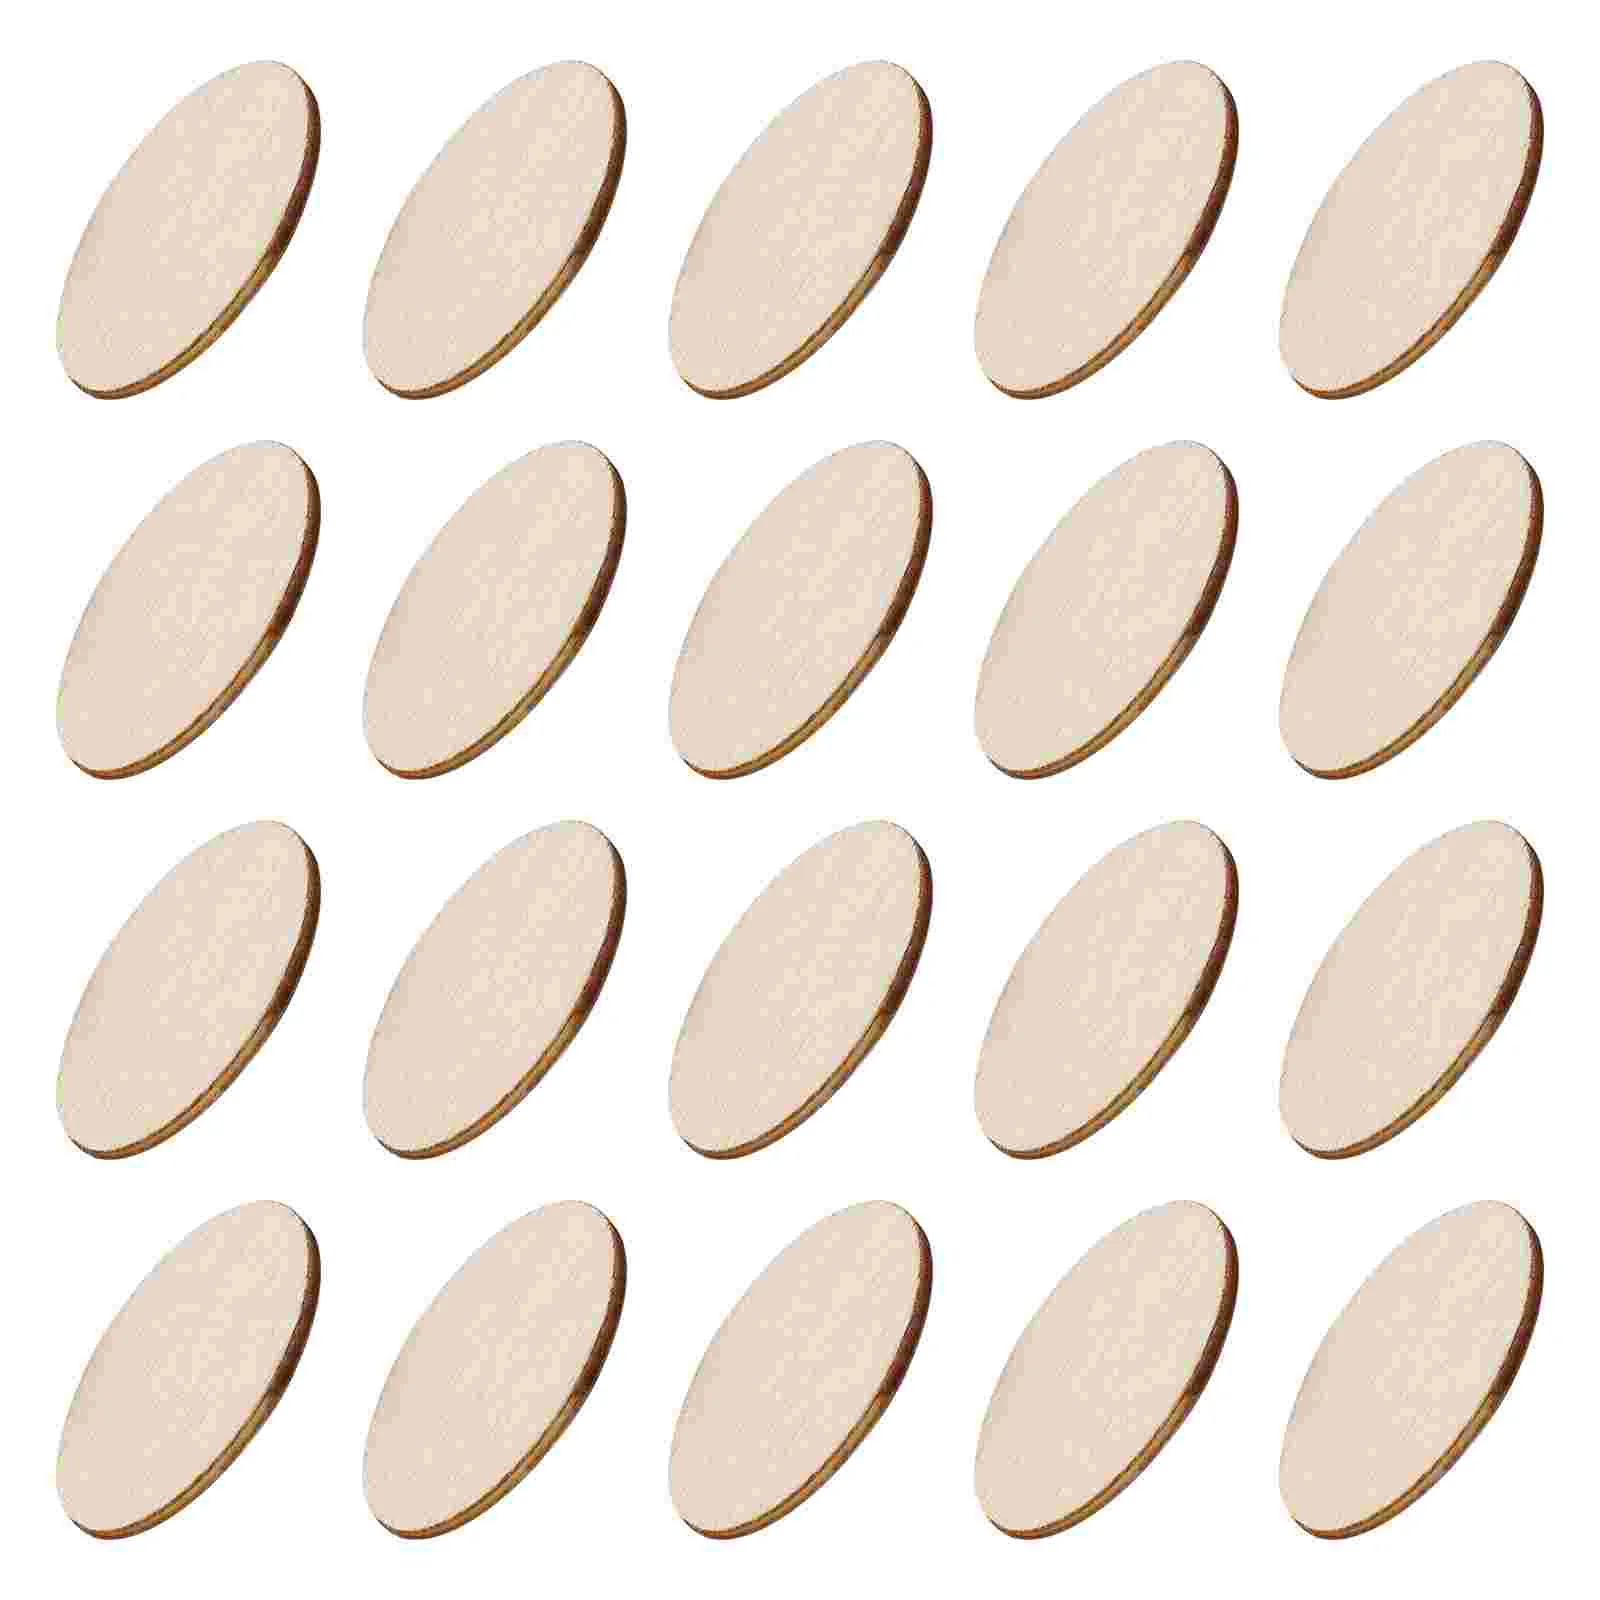 

NUOBESTY 200pcs Unfinished Wood Oval Slices Natural Rustic Wood Decors Cutout Oval Wood Chips for DIY Craft